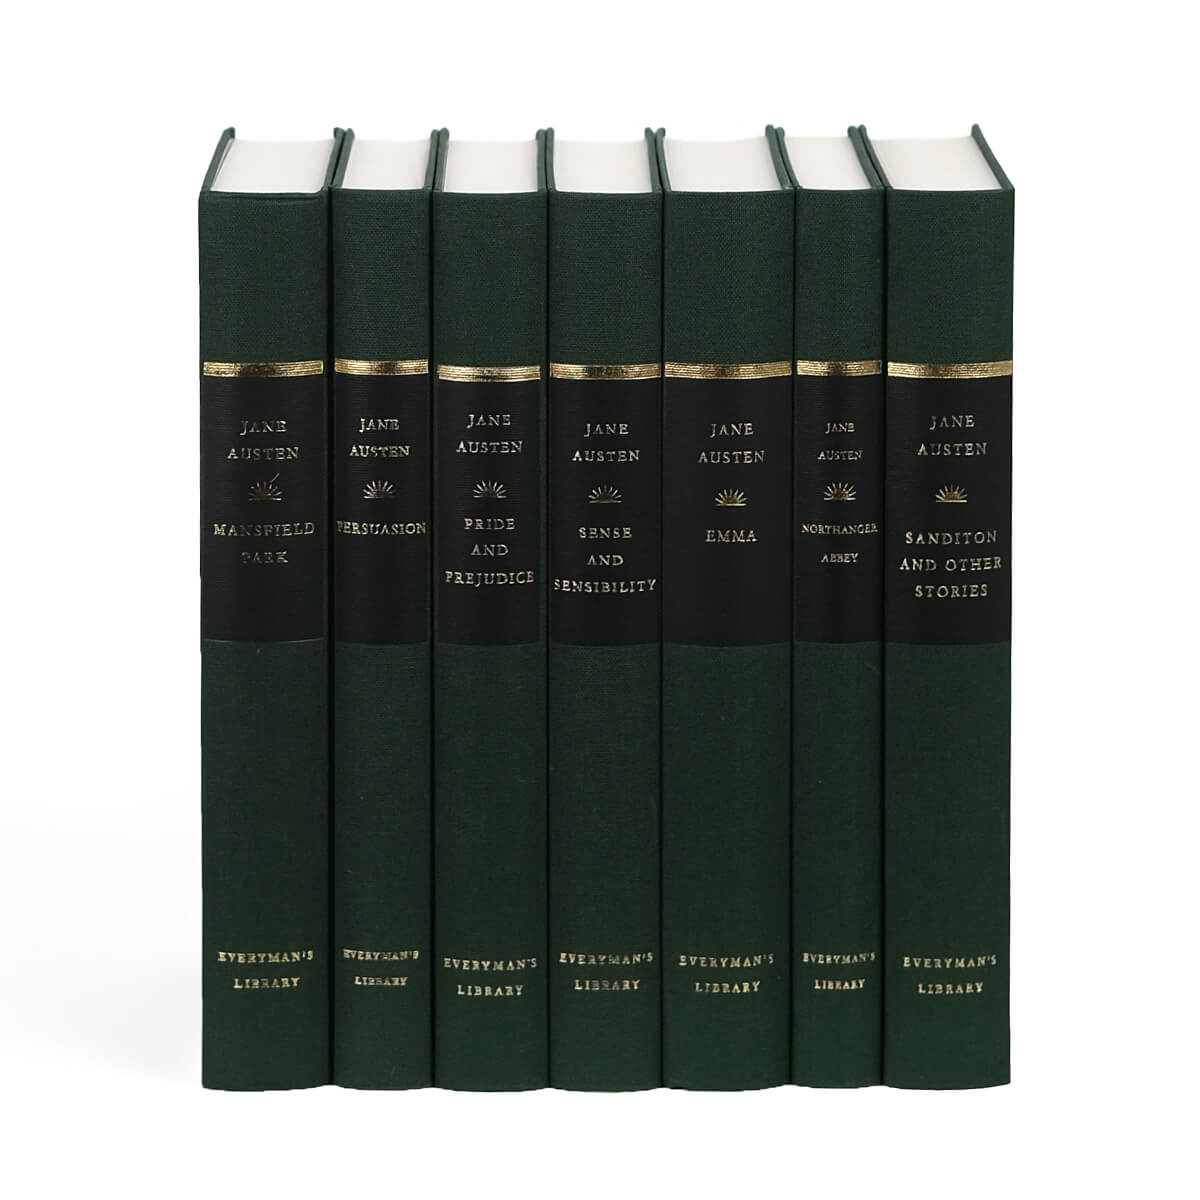 Unjacketed Everyman's Library books in the Jane Austen Delicious Solitude set with green fabric spines.